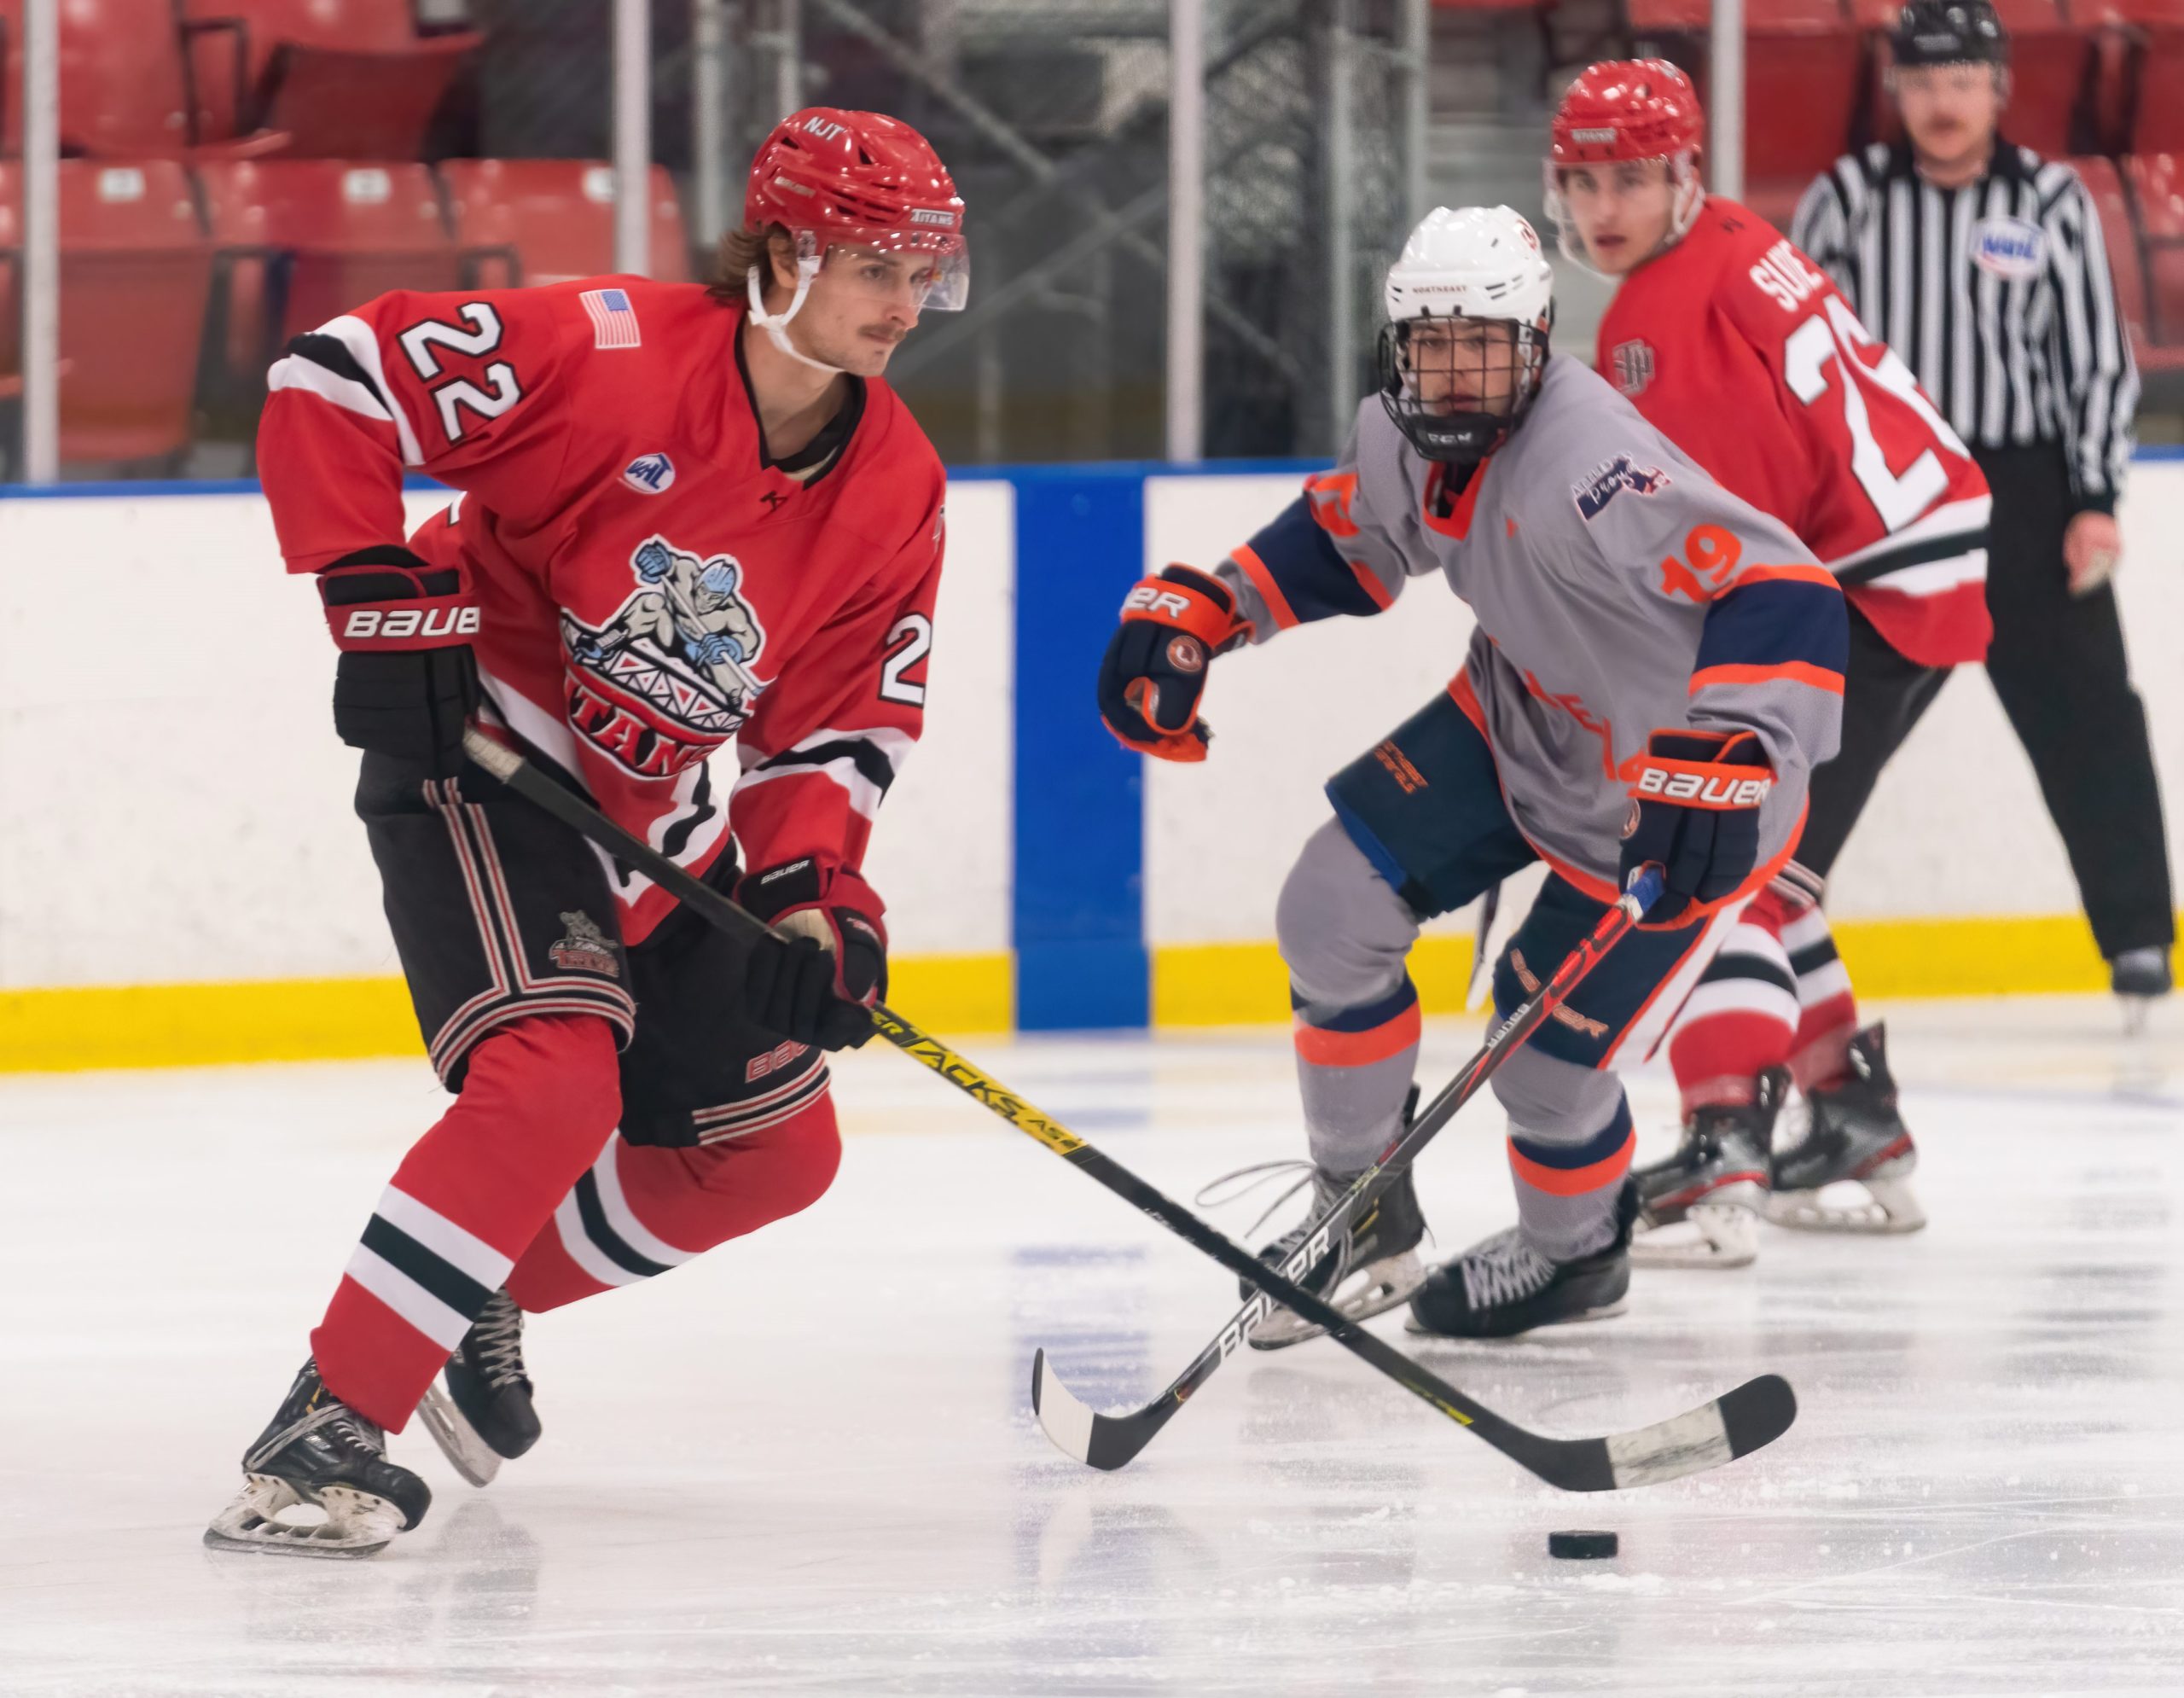 Weekend Preview: 01/22 – 01/24; Generals “host” Titans for two game series